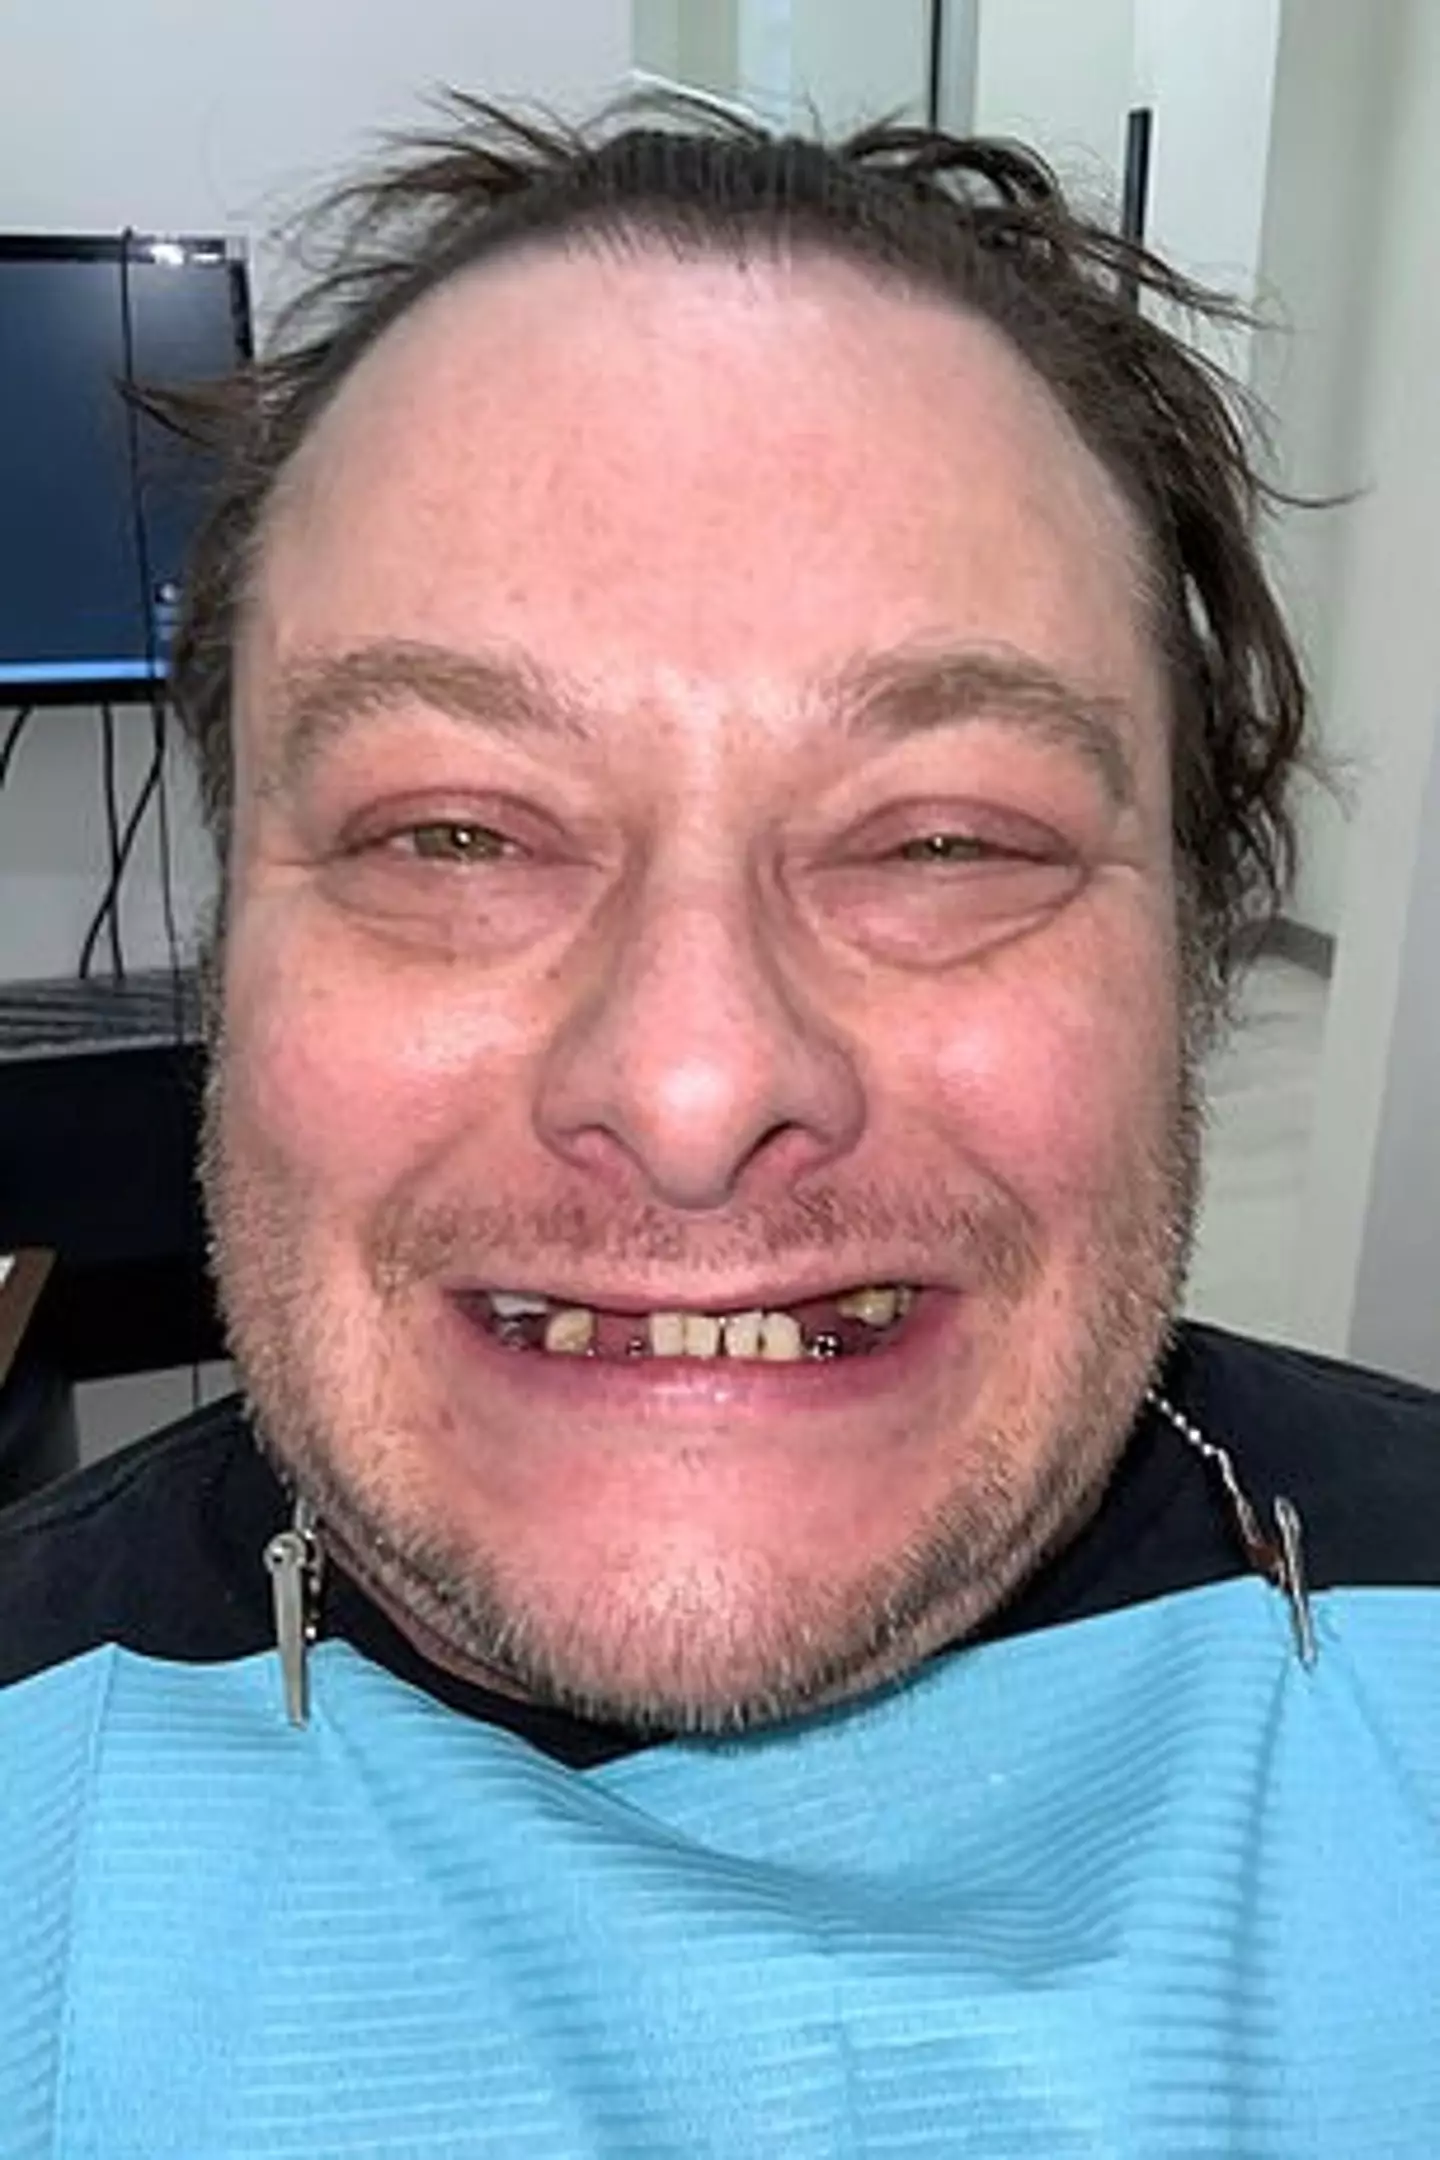 Furlong's teeth rotted and fell out due to years of meth use.